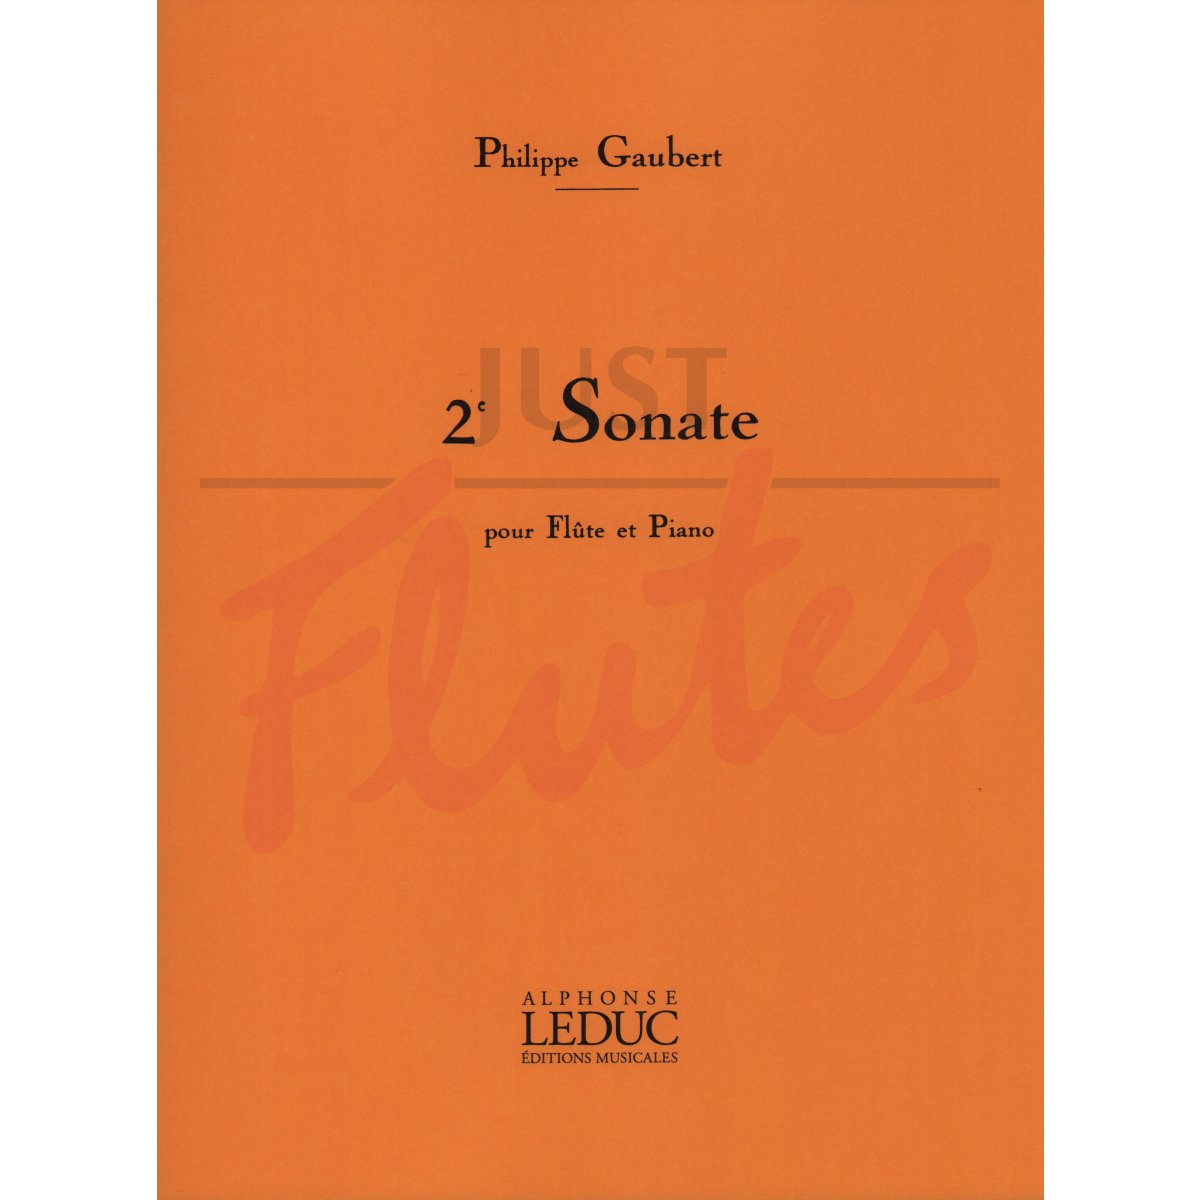 2nd Sonata for Flute and Piano